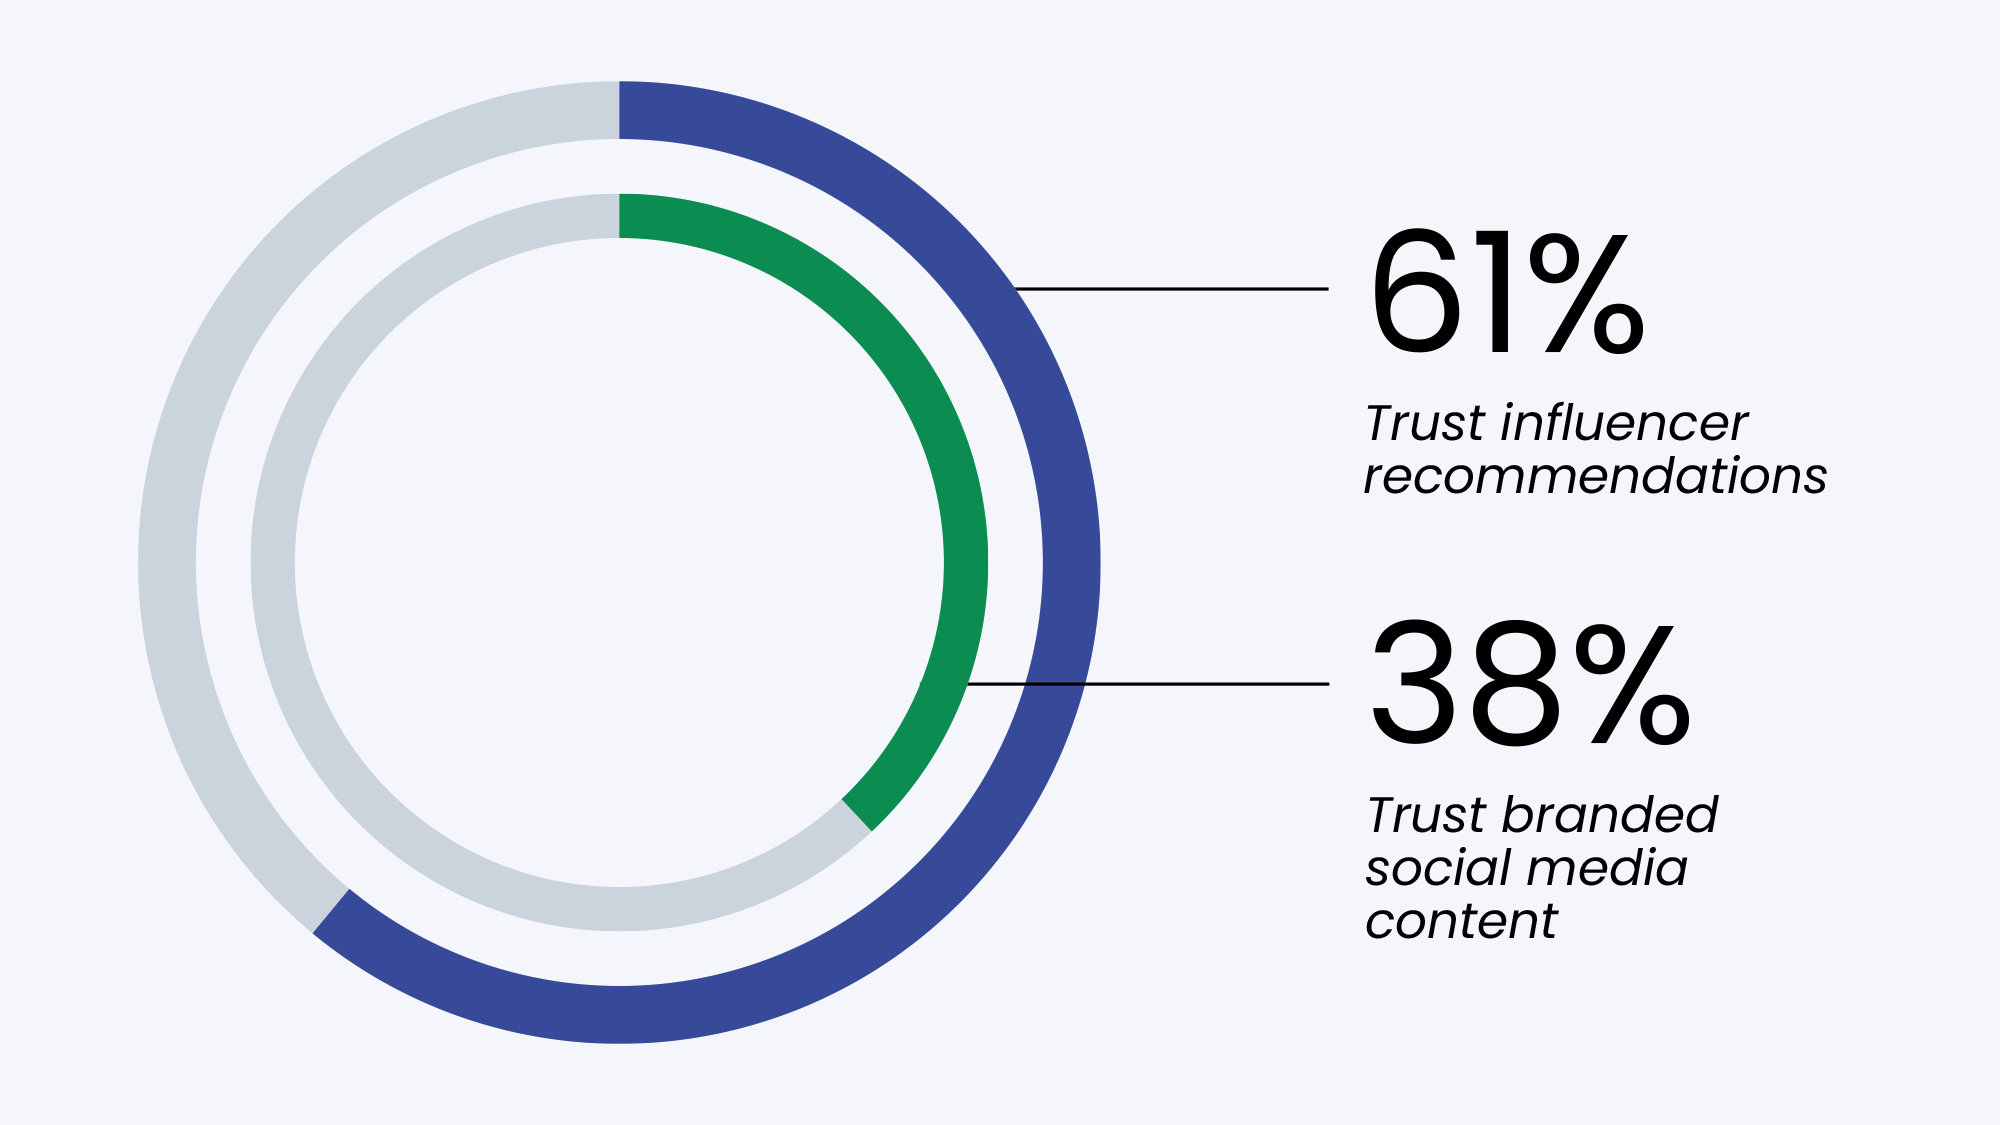 61% of consumers trust influencer recommendations